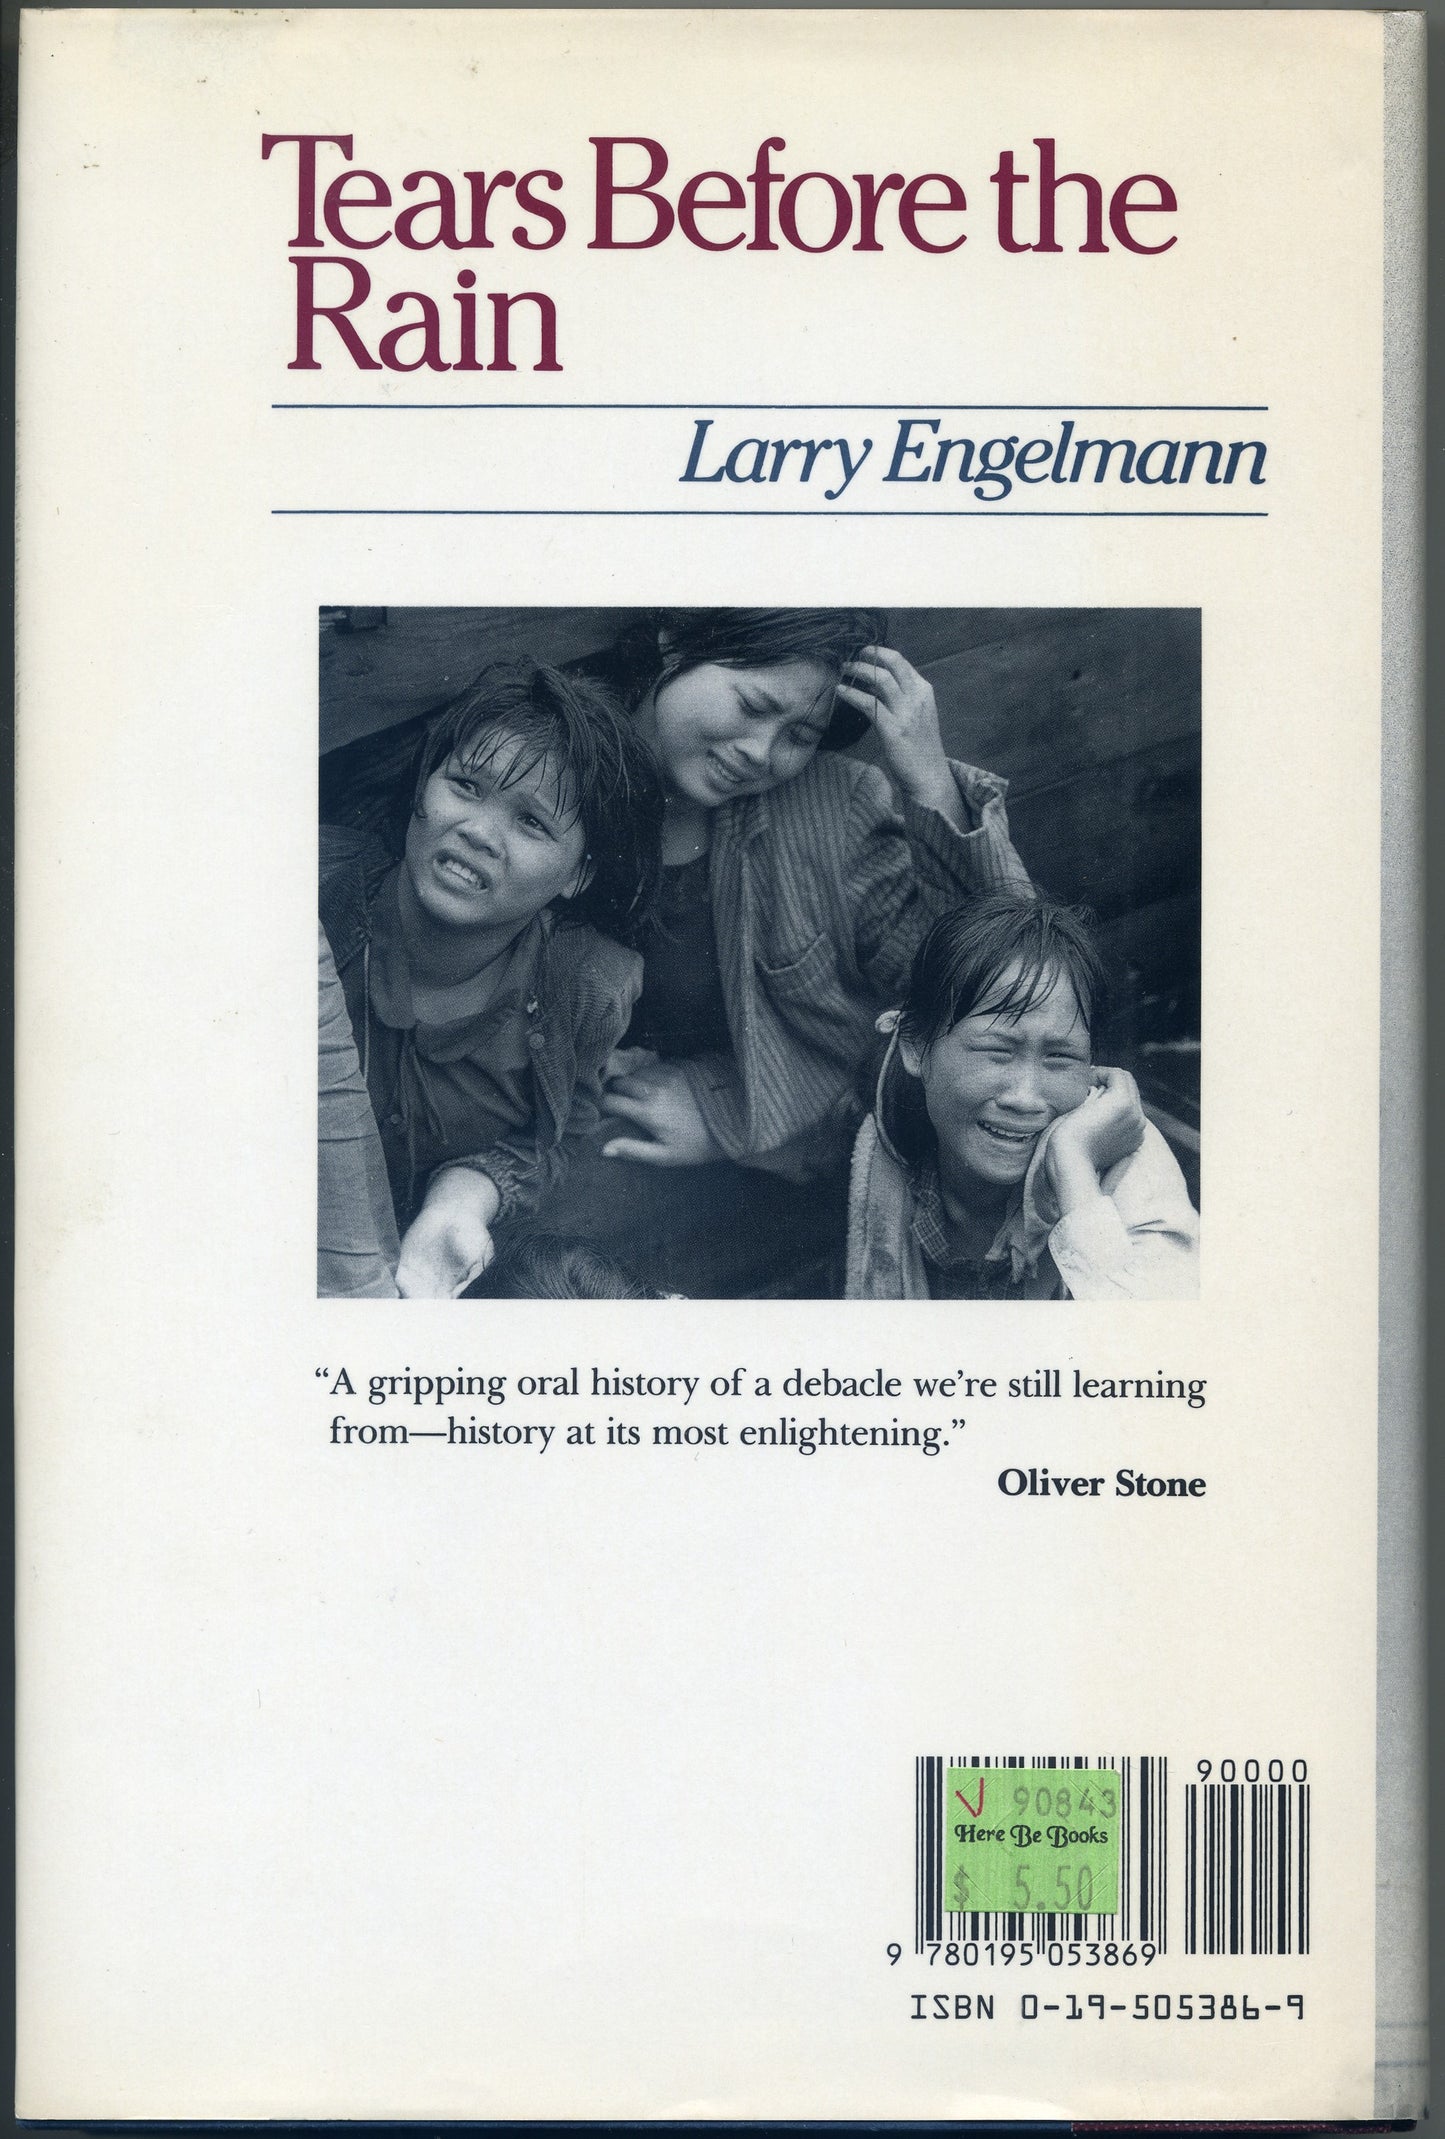 Tears Before the Rain: An oral history of the fall of South Vietnam